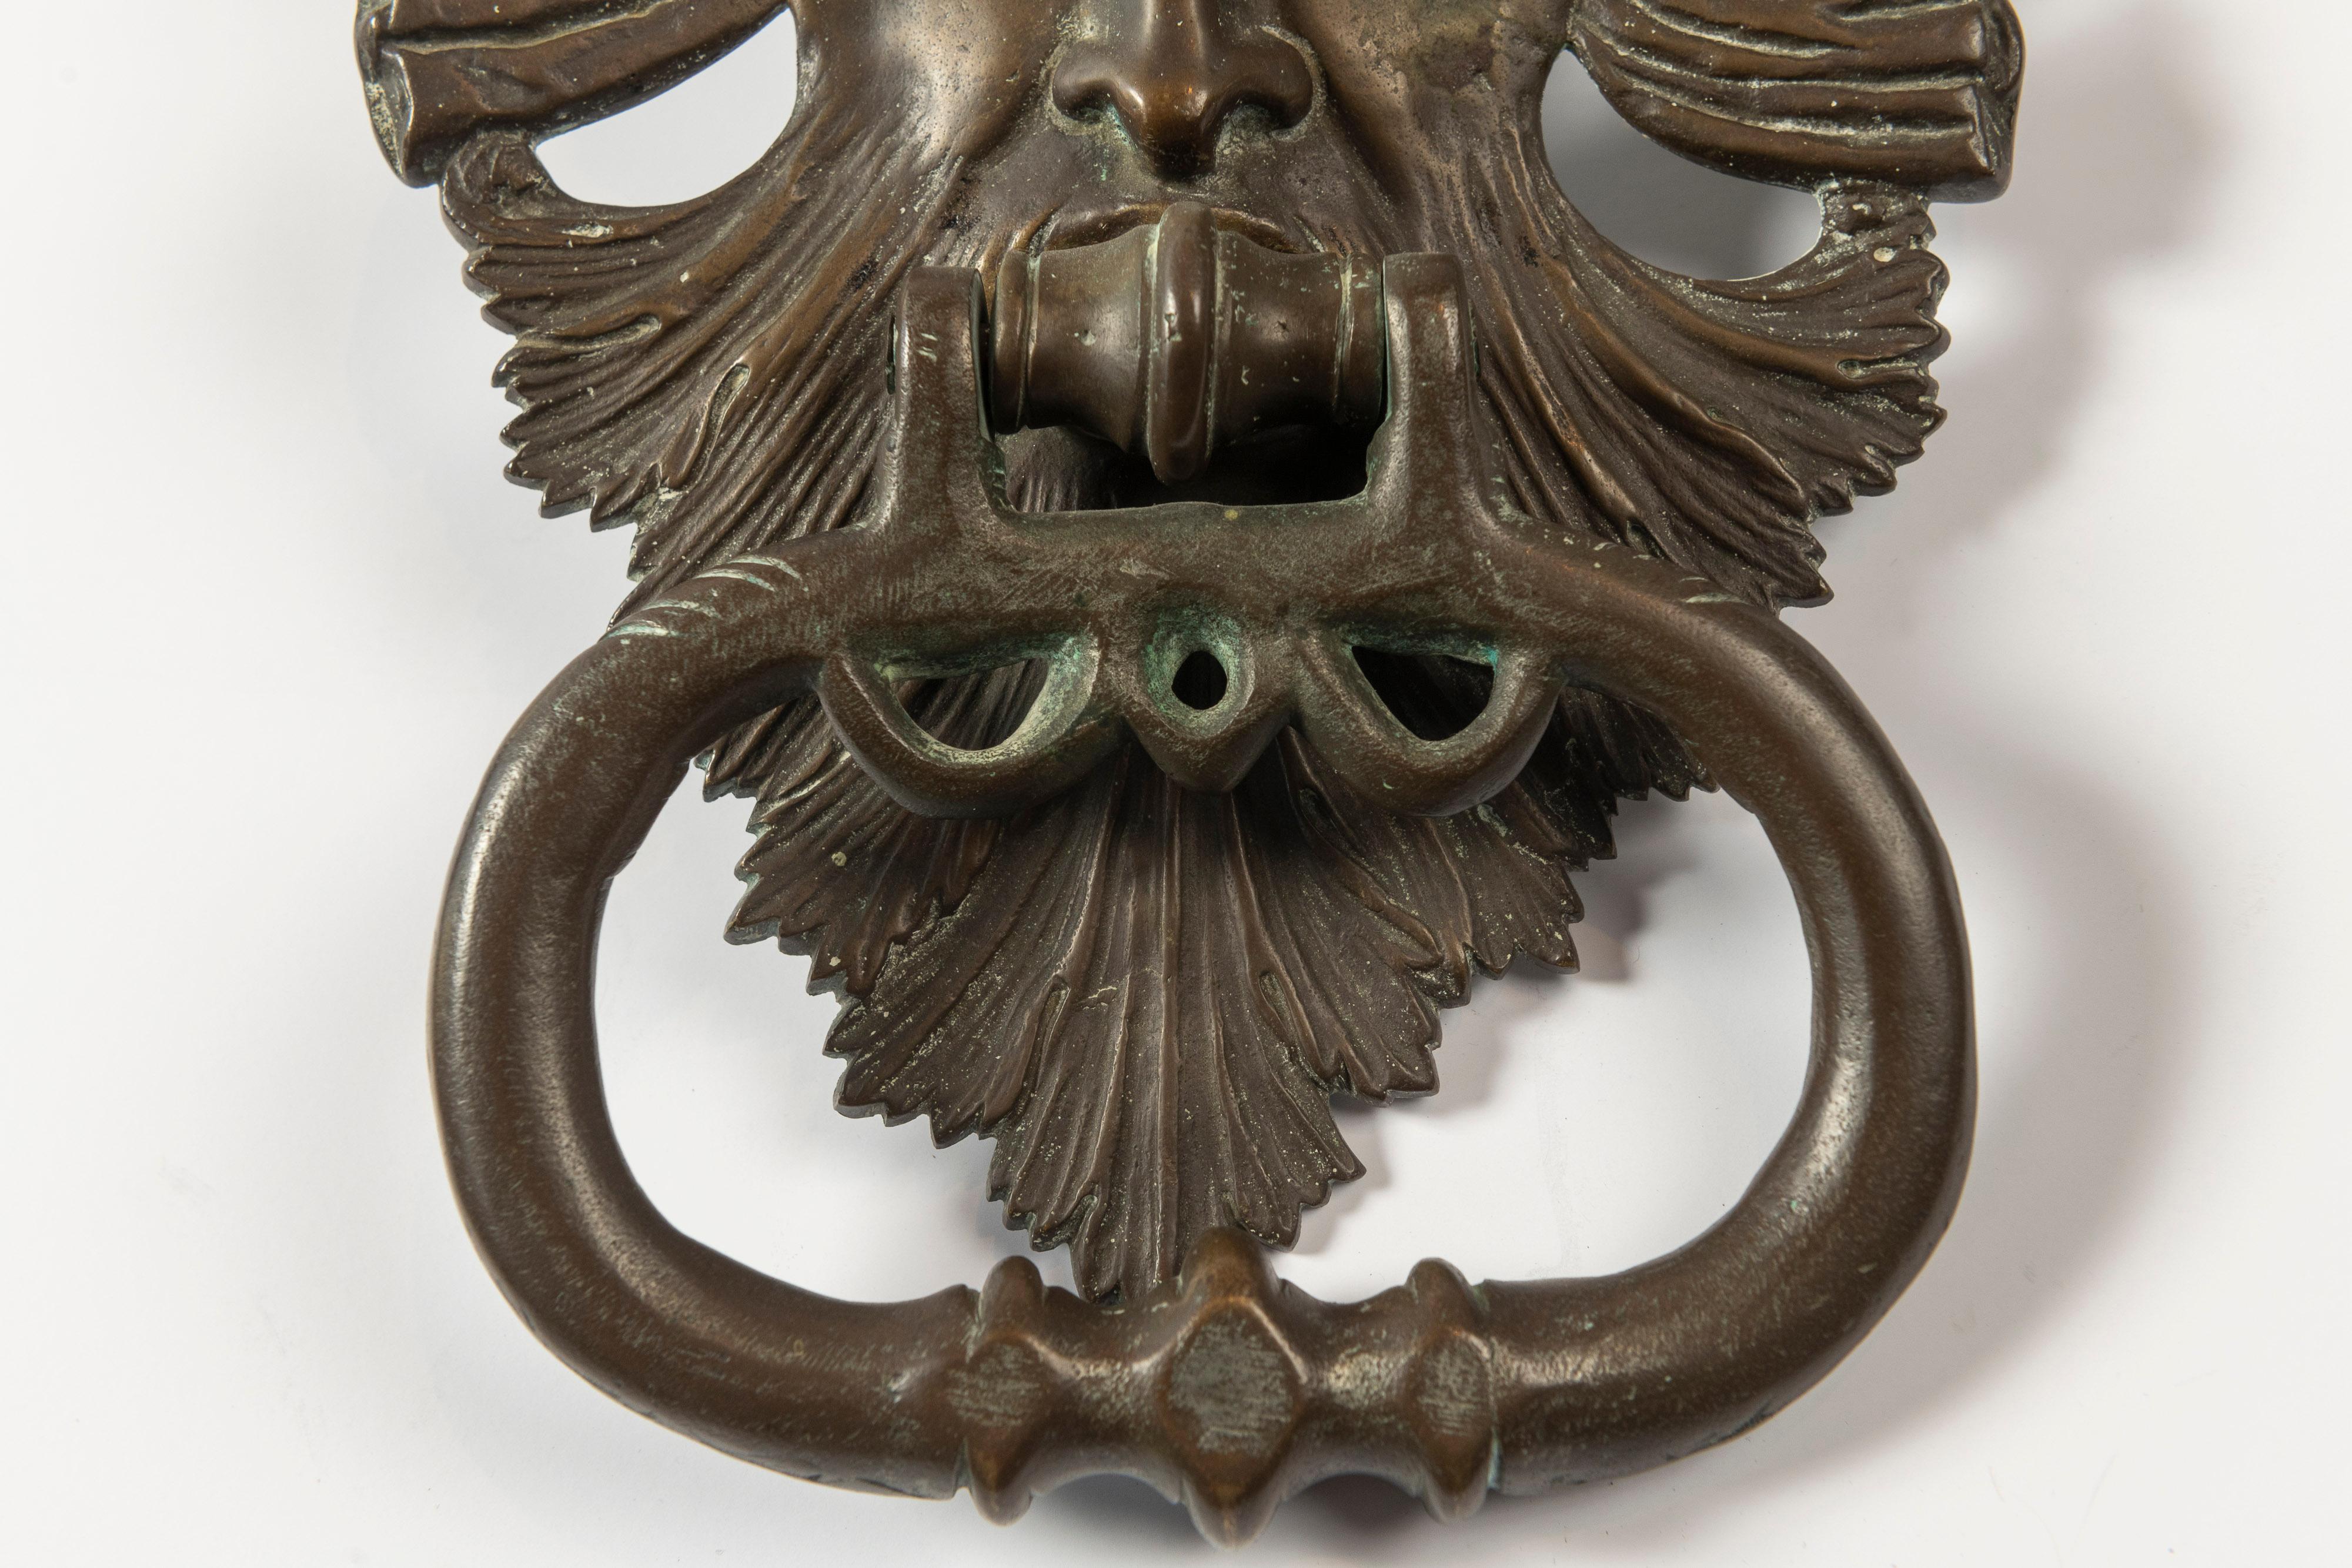 Impressive solid brass door knocker presumed to be of the ancient Roman mythological god of the sea, Neptune. The piece is in excellent condition and ready to adorn your door while making a classical statement.